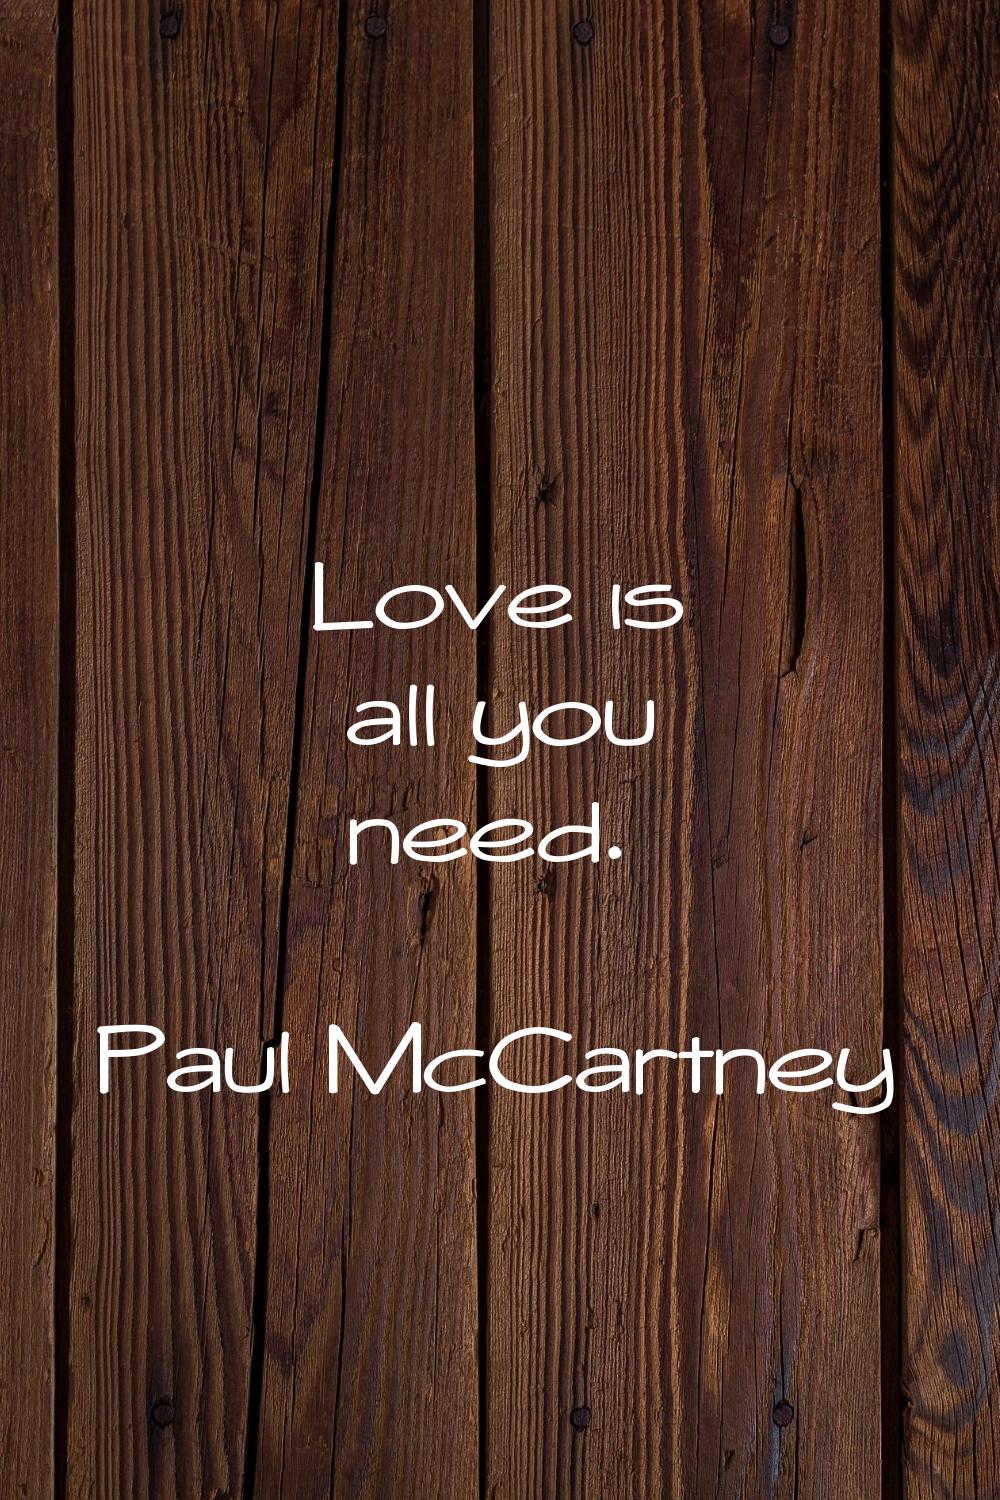 Love is all you need.